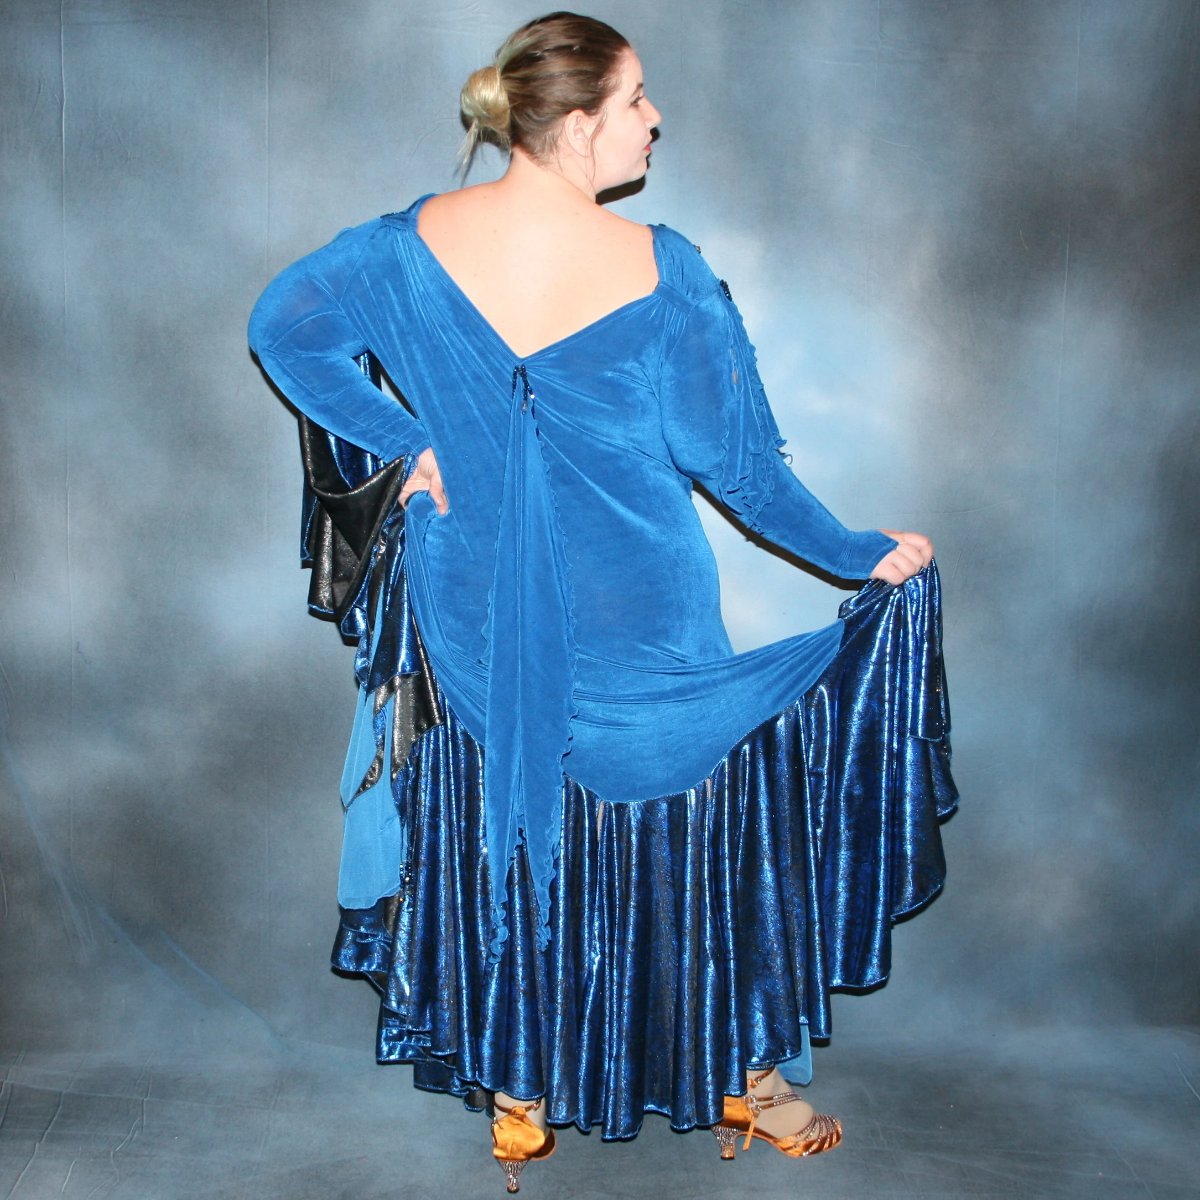 Blue Plus Size Ballroom Dress with Black Accents, Hand Beading-Mira